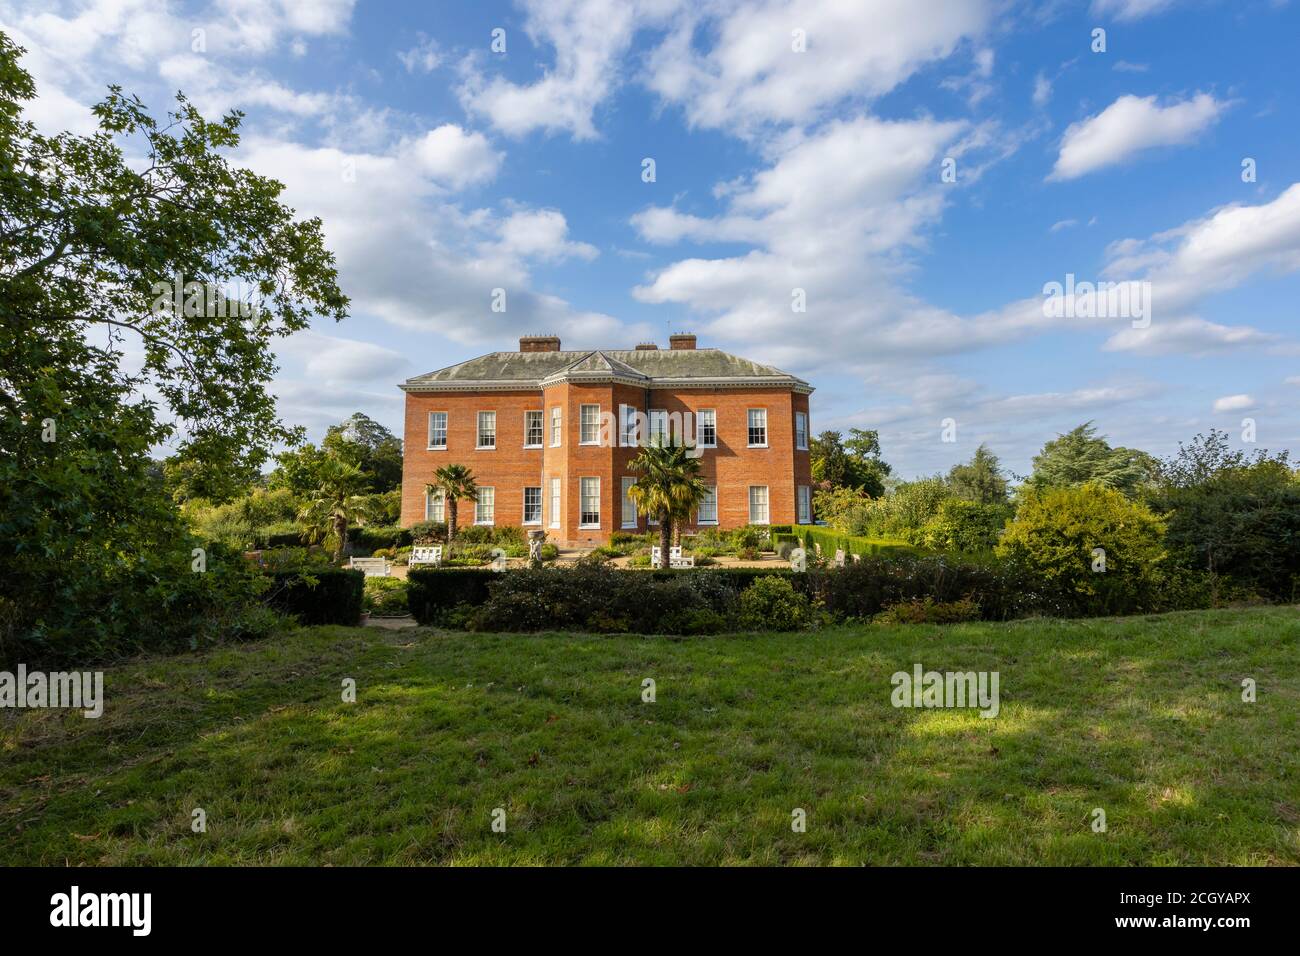 Side view of Hatchlands Park, a red-brick country house with surrounding gardens in East Clandon near Guildford, Surrey, south-east England Stock Photo